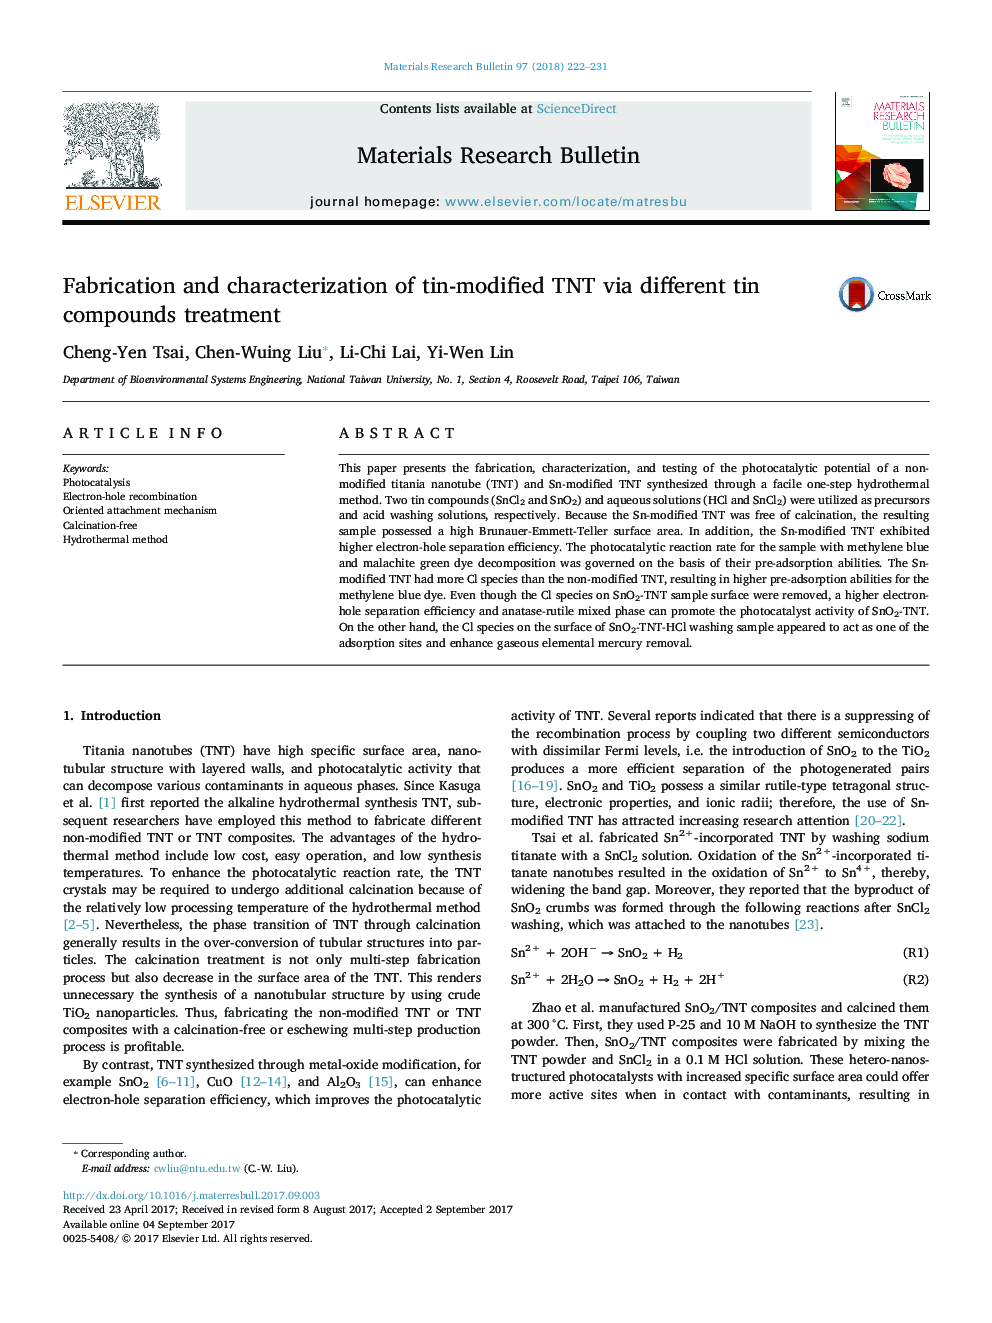 Fabrication and characterization of tin-modified TNT via different tin compounds treatment